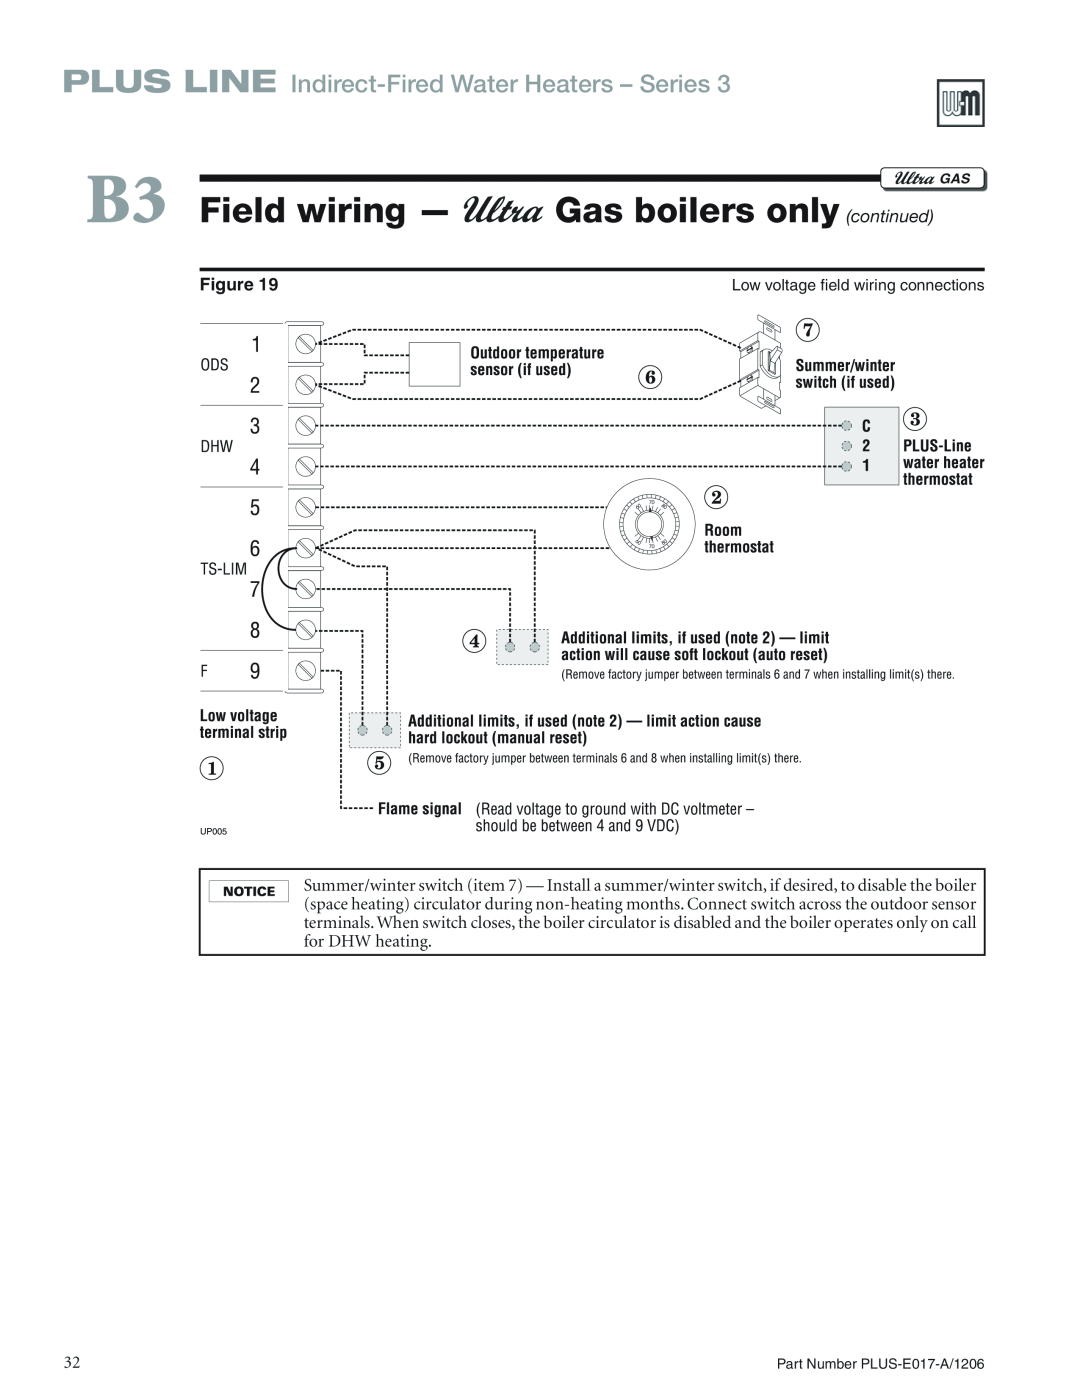 Weil-McLain PLUS-E017-A/1206 Gas boilers only continued, B3 Field wiring, PLUS LINE Indirect-FiredWater Heaters - Series 